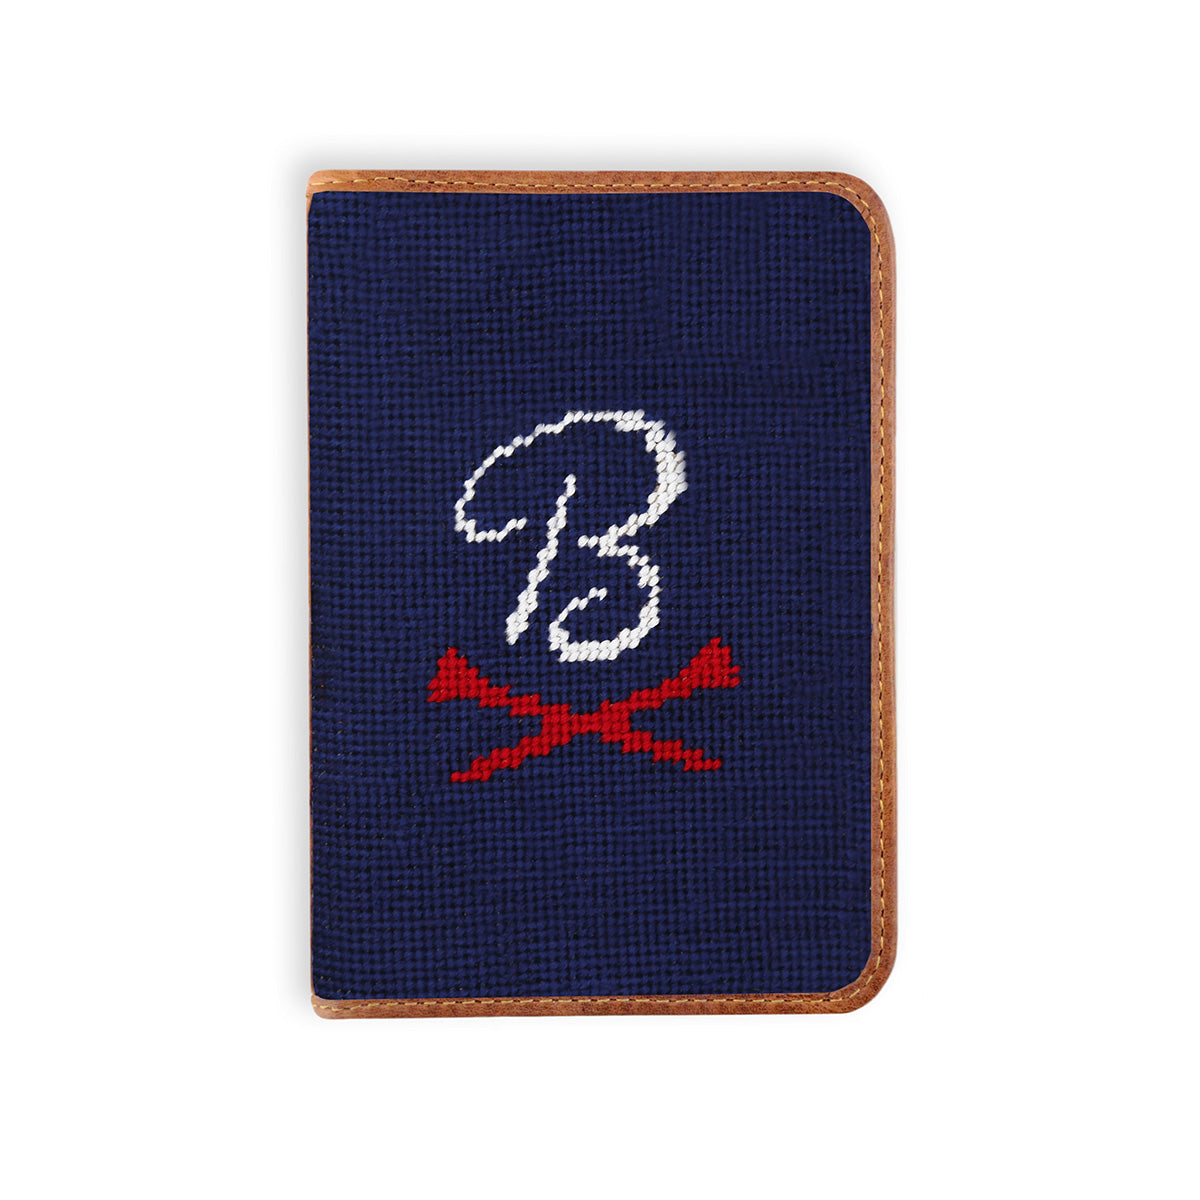 Smathers & Branson x Barstool Golf Crossed Tees Scorecard Holder-Golf Accessories-Fore Play-Navy-One Size-Barstool Sports